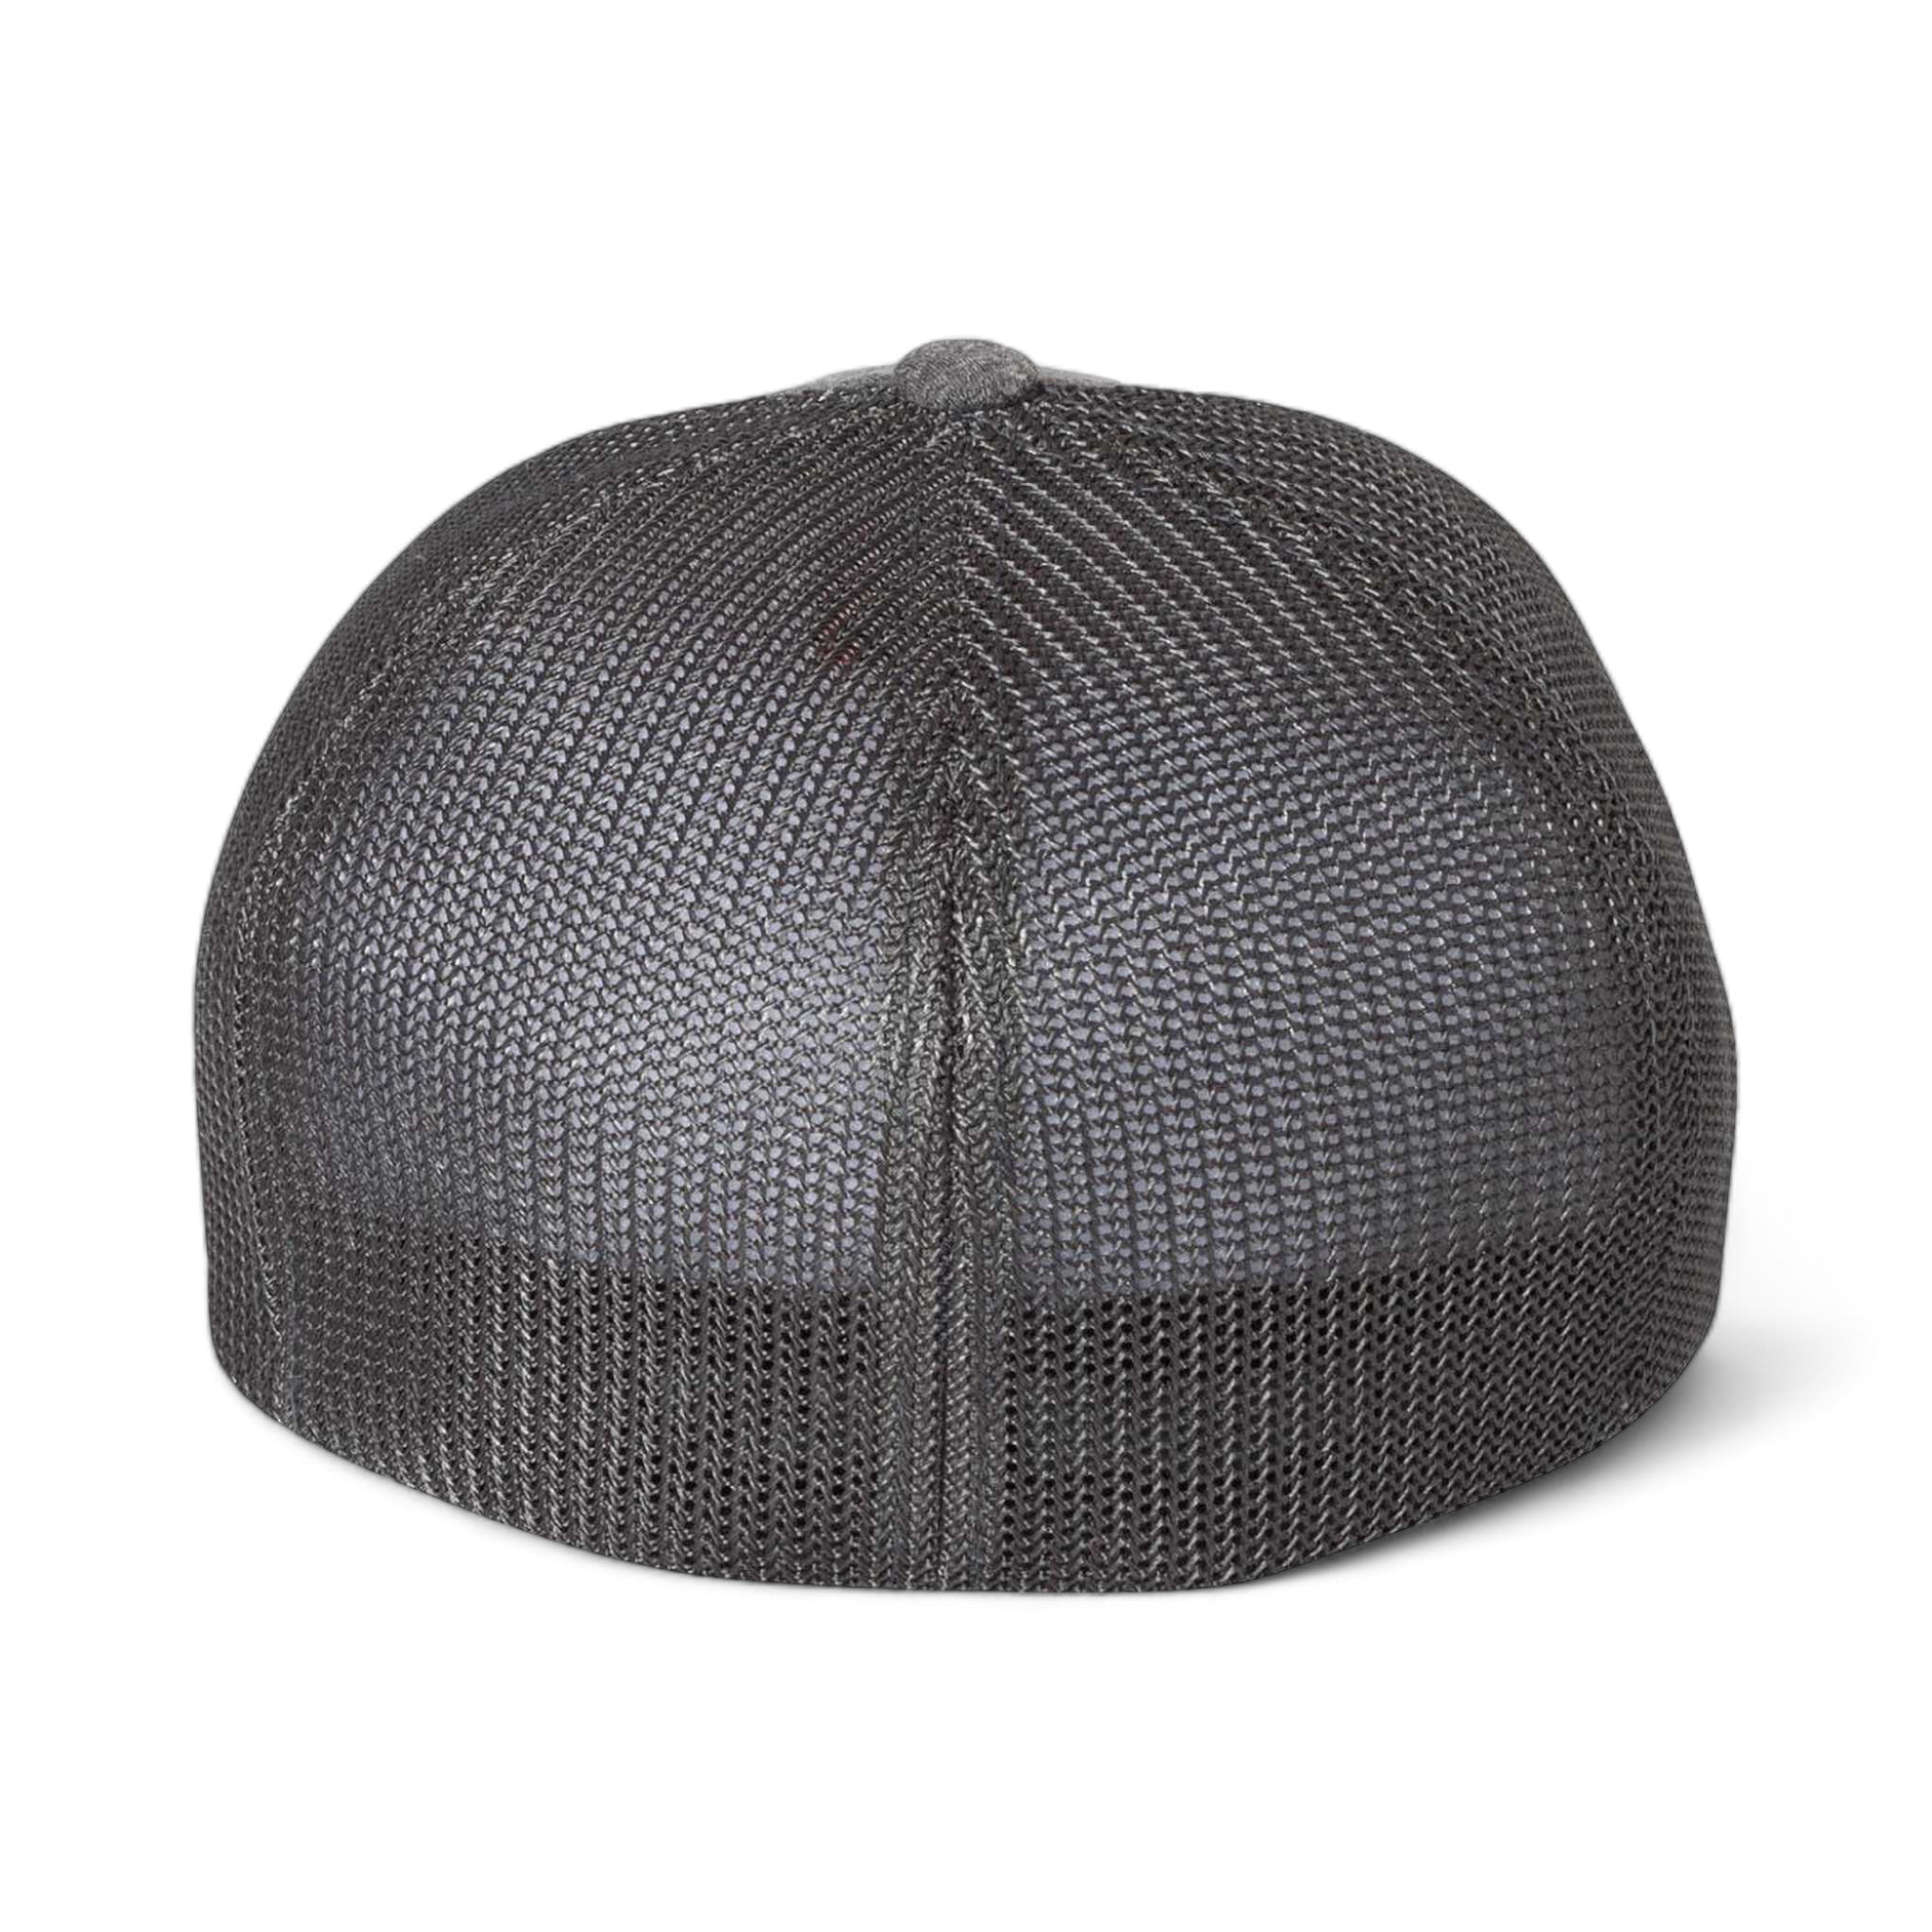 Back view of Flexfit 6311 custom hat in dark heather grey and charcoal